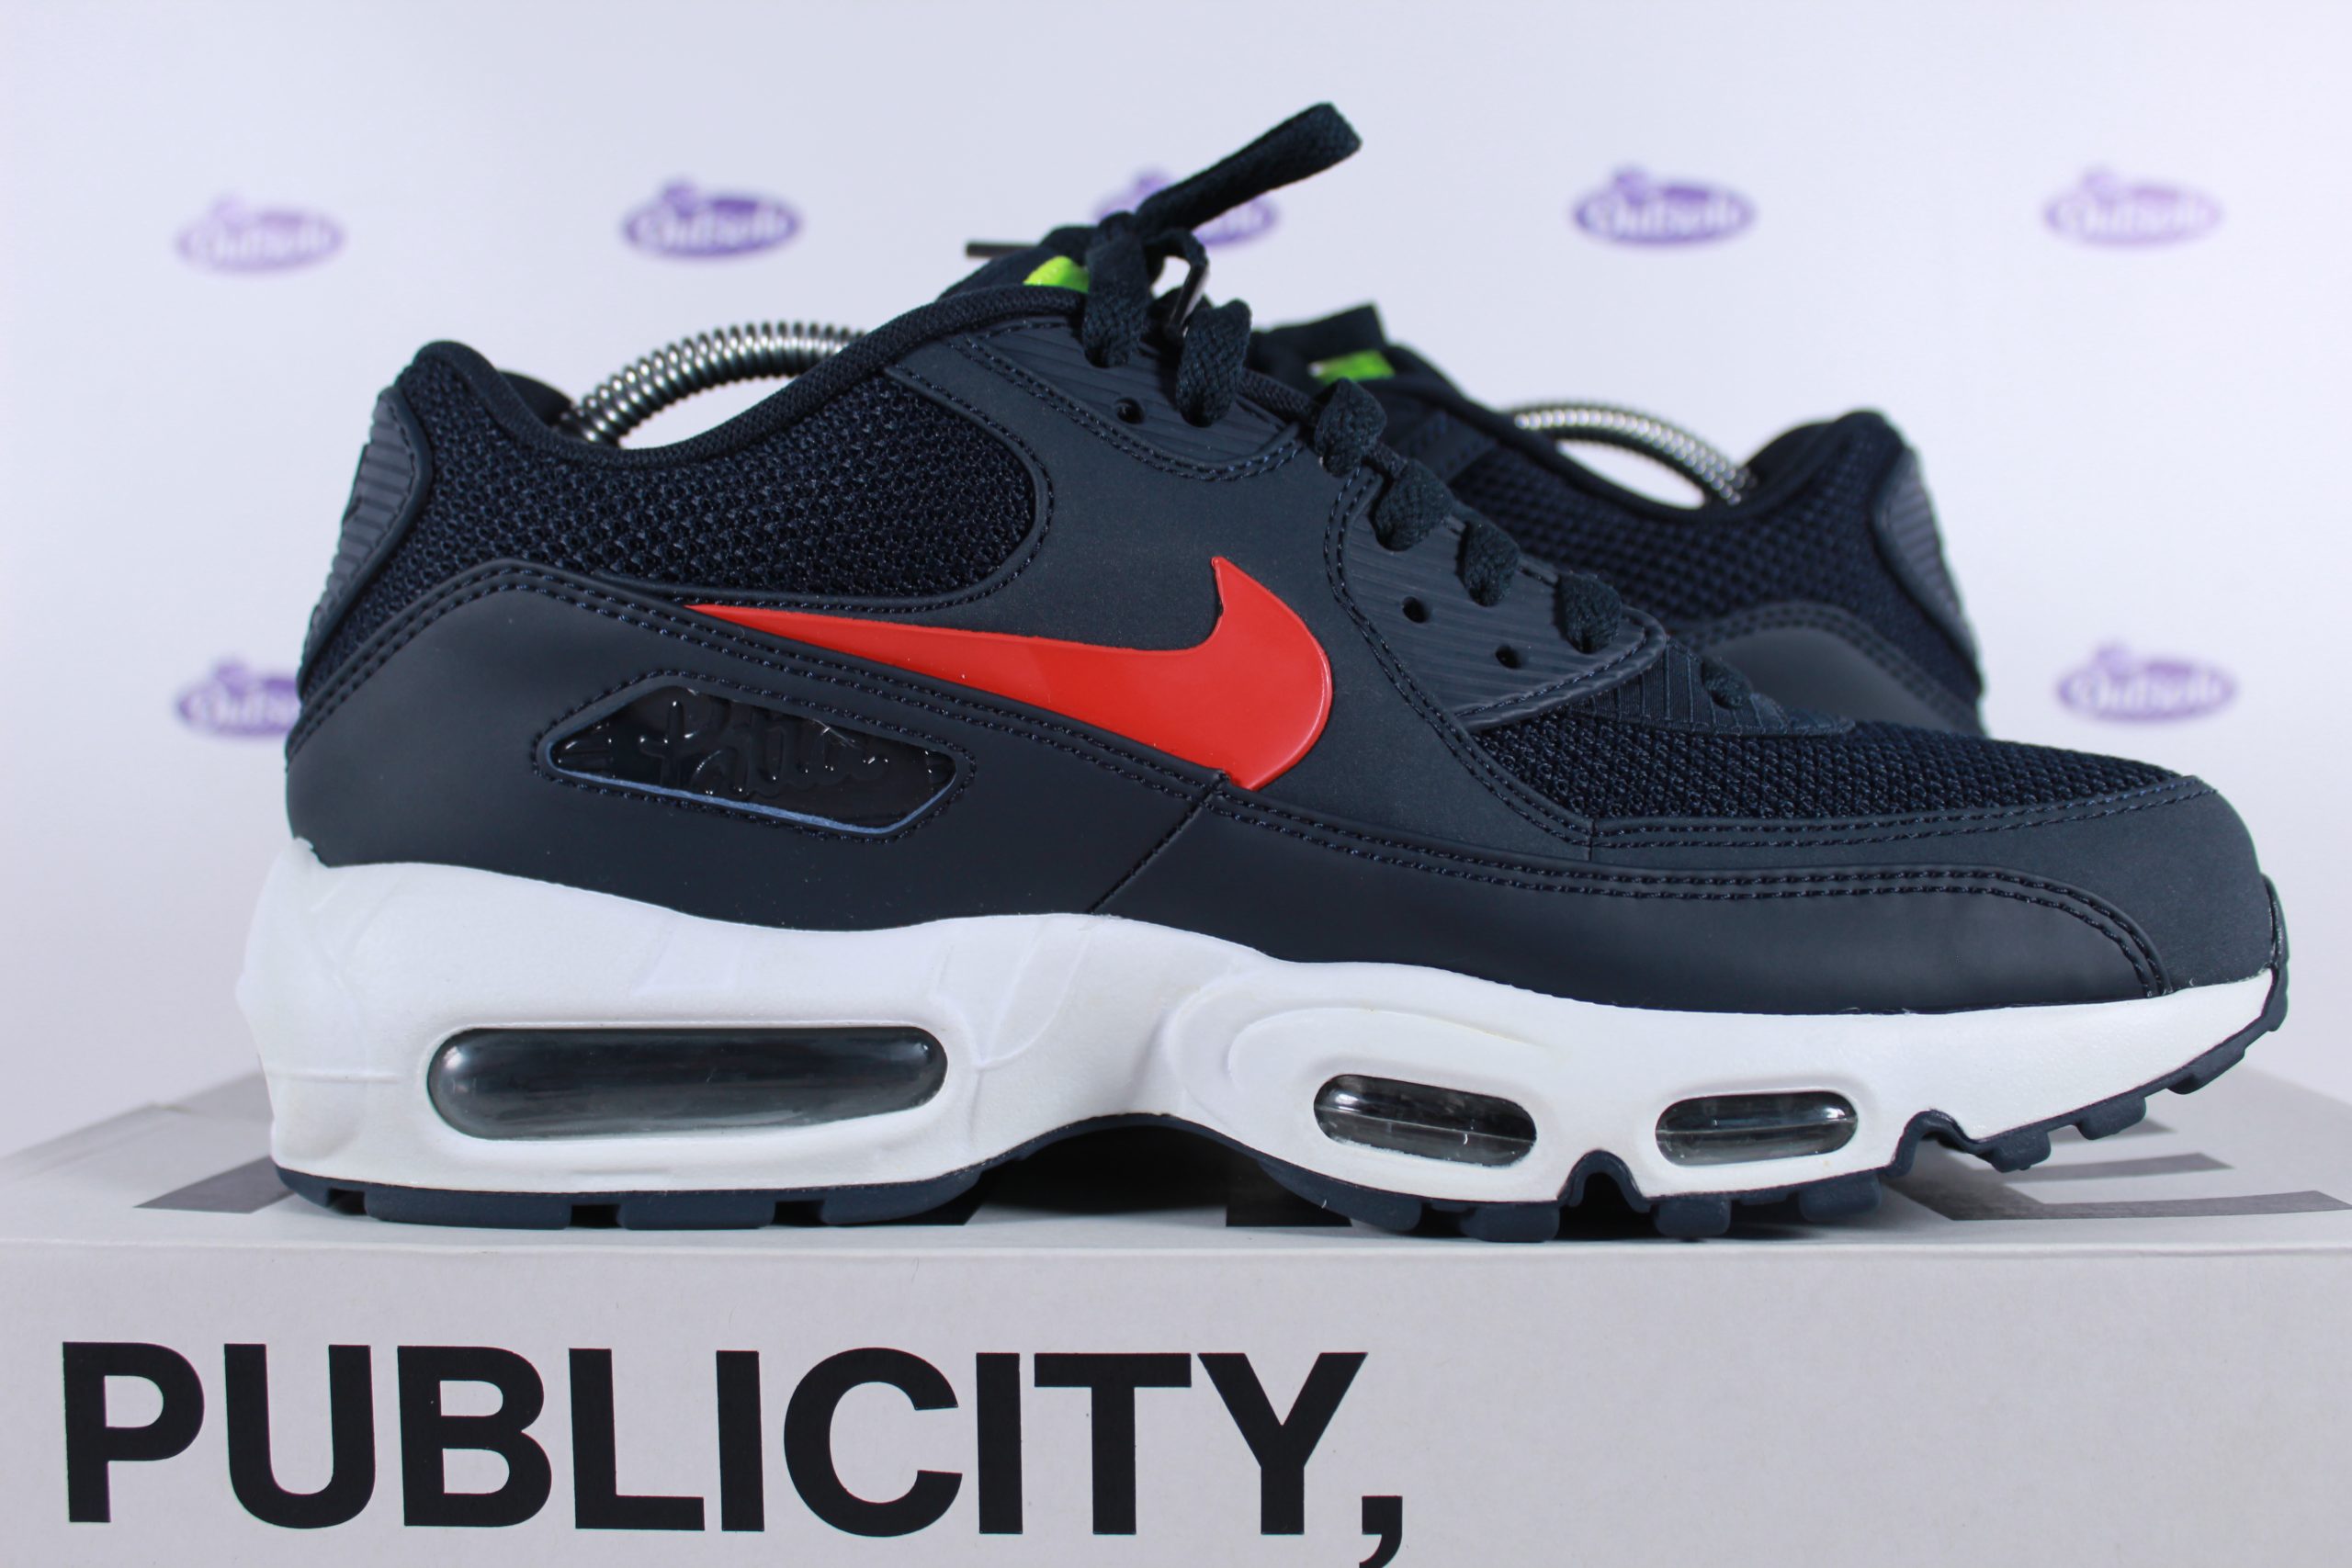 Nike Air Max 90/95 Patta Publicity • ✓ In stock at Outsole